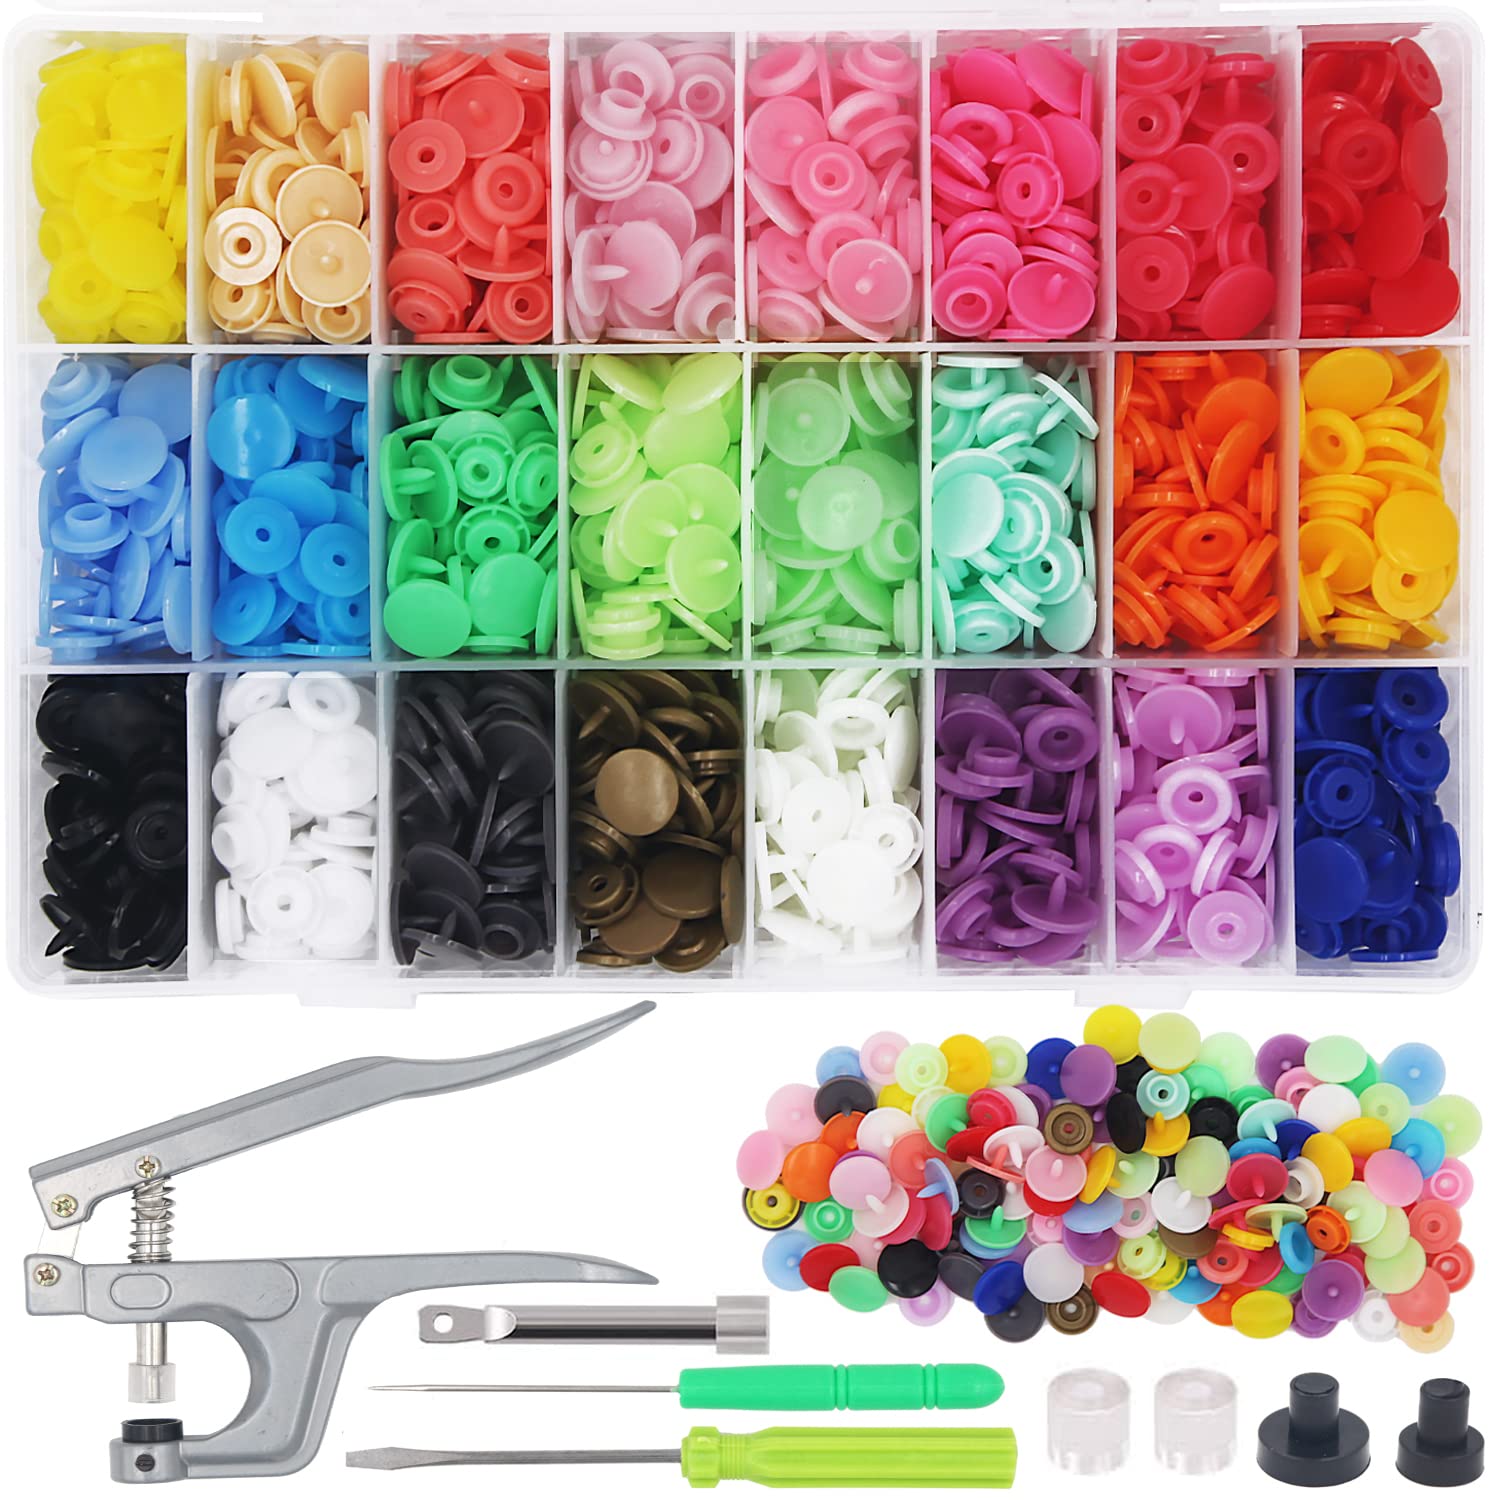 Renashed 300sets T5 Sewing Snaps Fasteners Kit with Press Pliers Tool, Plastic Metal No-Sew Snap Buttons Rainbow Colors for Clothes, Wallets, Bibs, Rain Coat